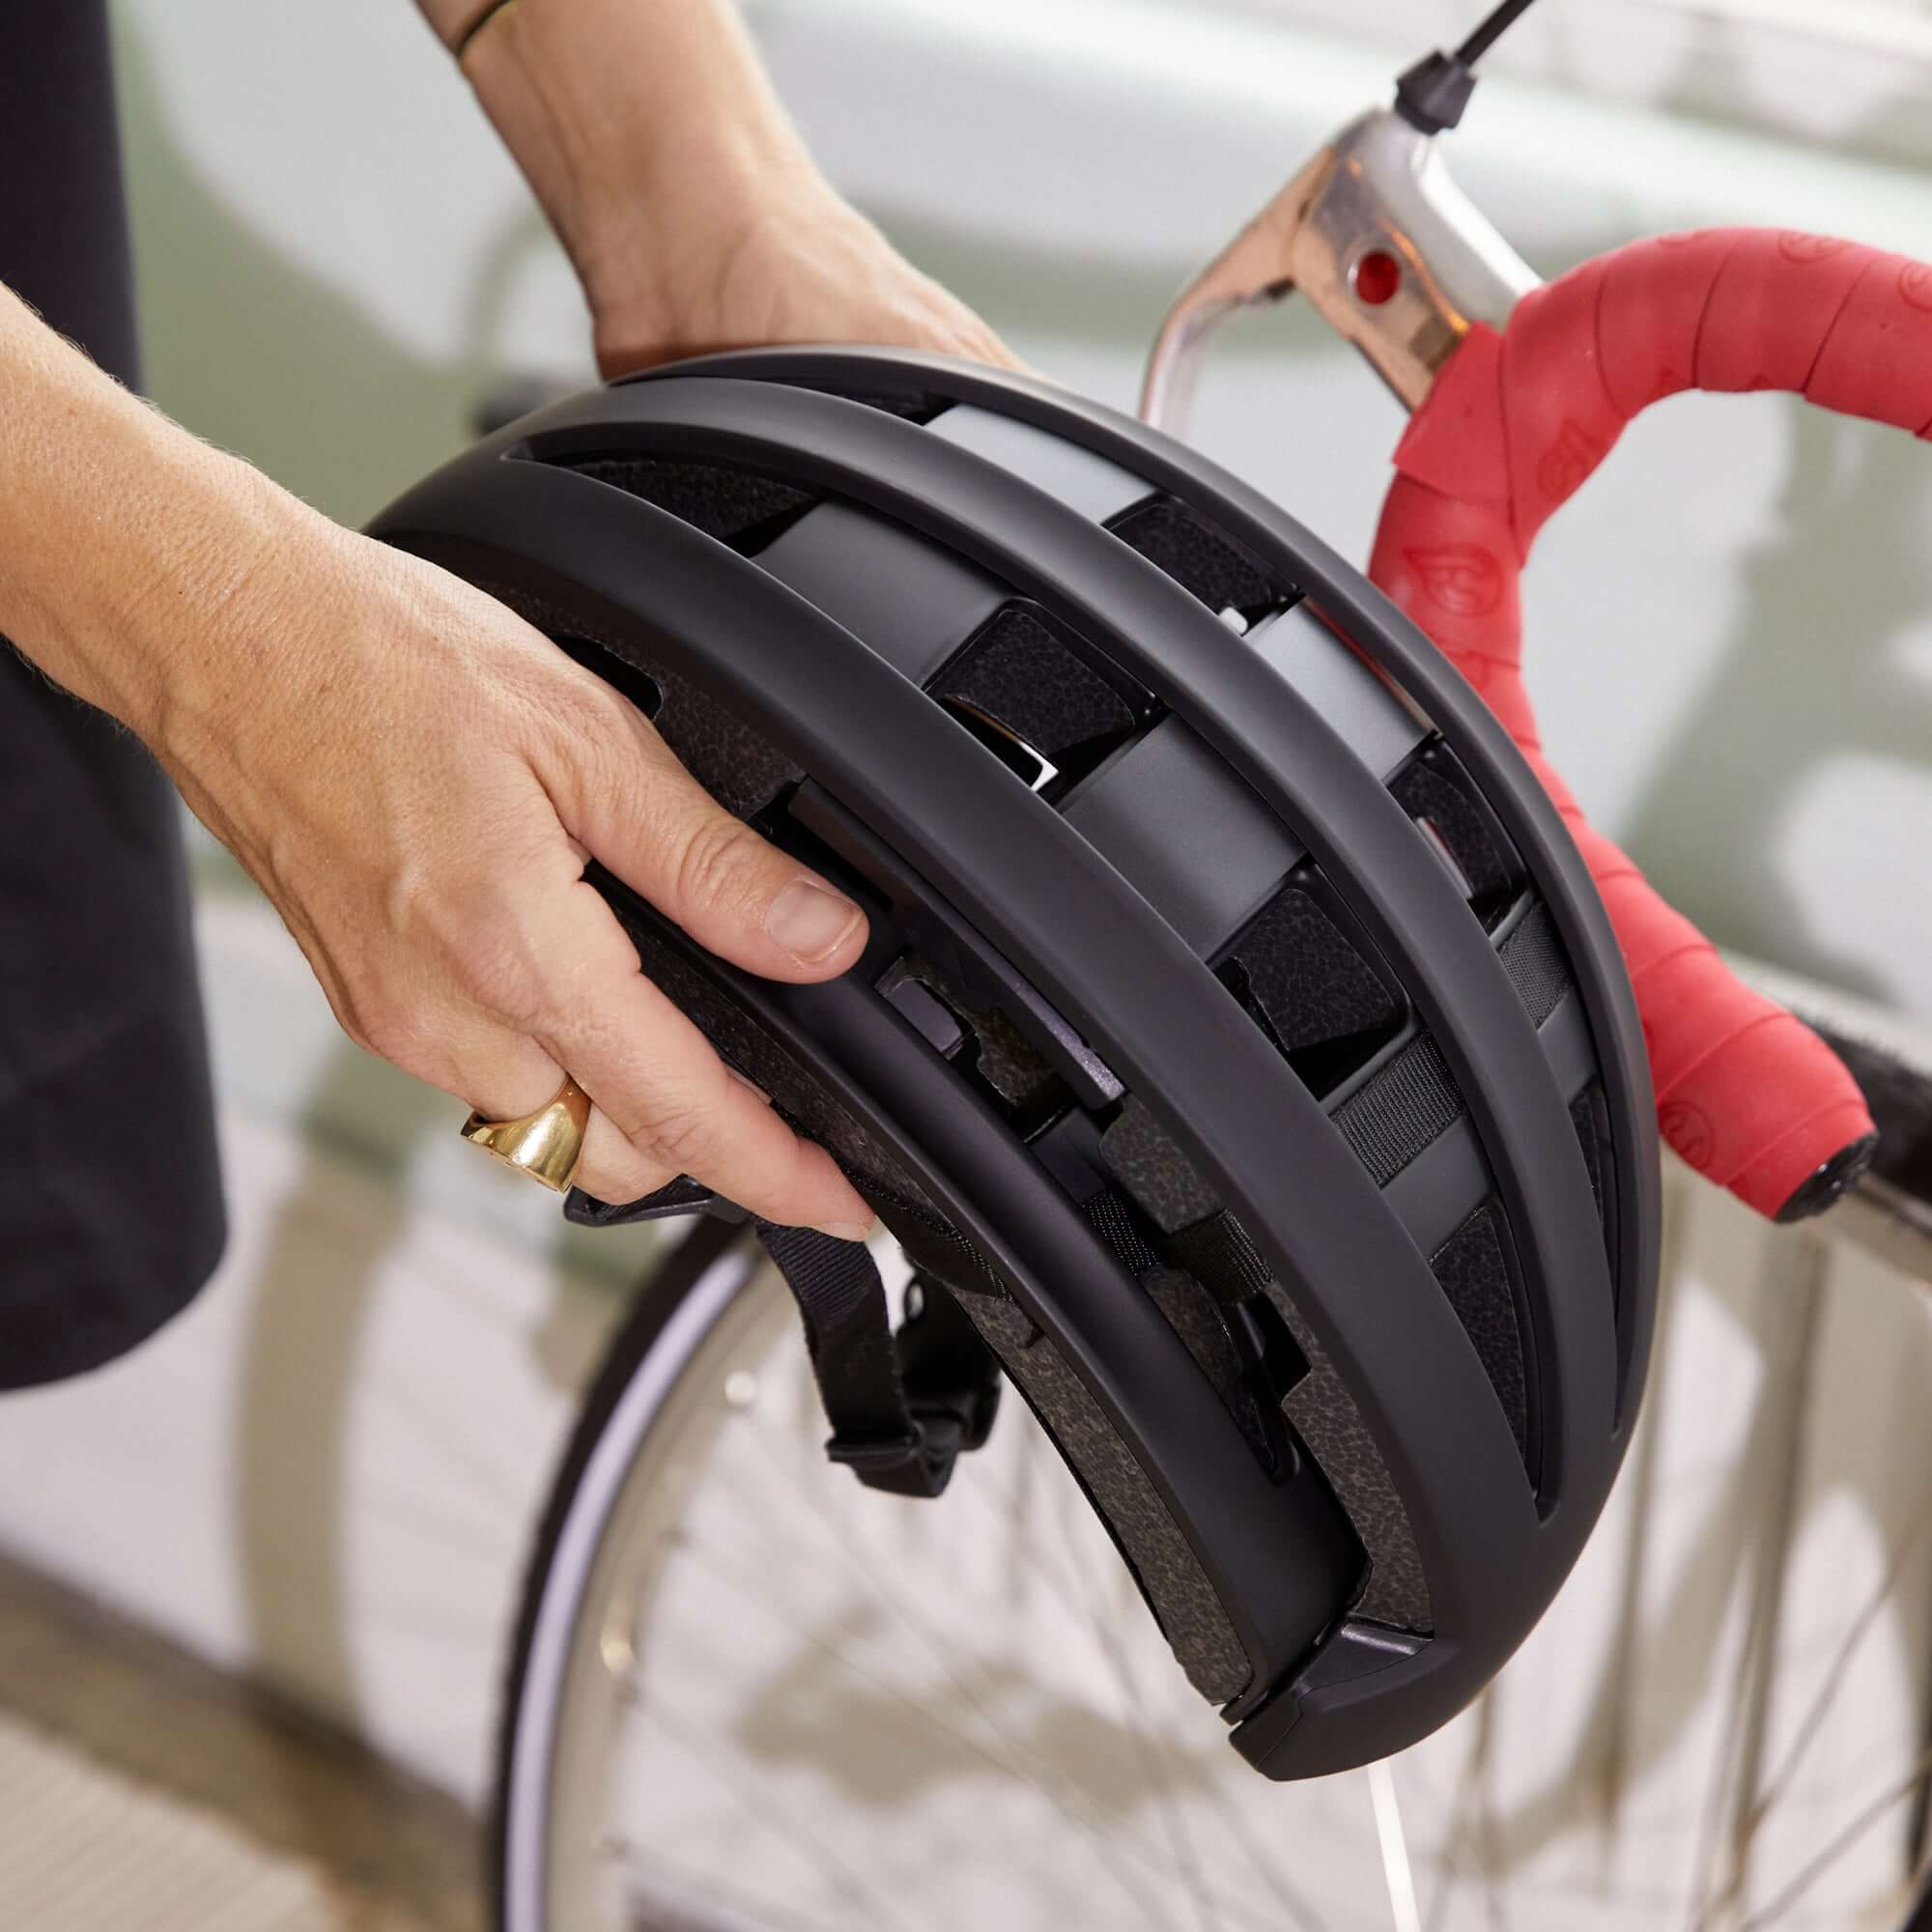 Fend collapsible cycling helmet reduces 50% smaller to fit in any bag